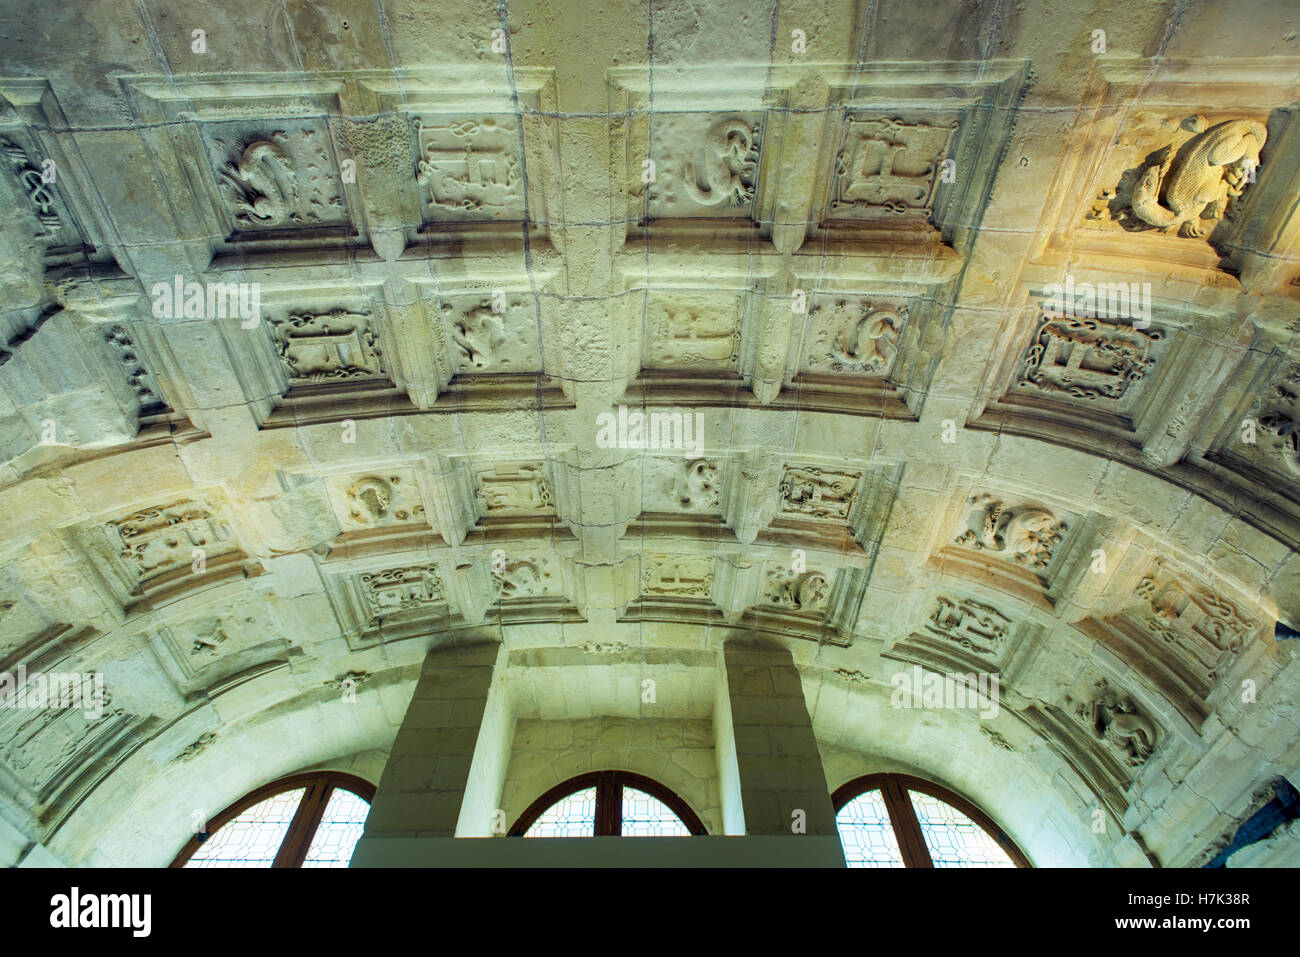 Ceiling detail of the 2nd floor south west vaulted room in Chateau Chambord in the Loire Valley, France Stock Photo